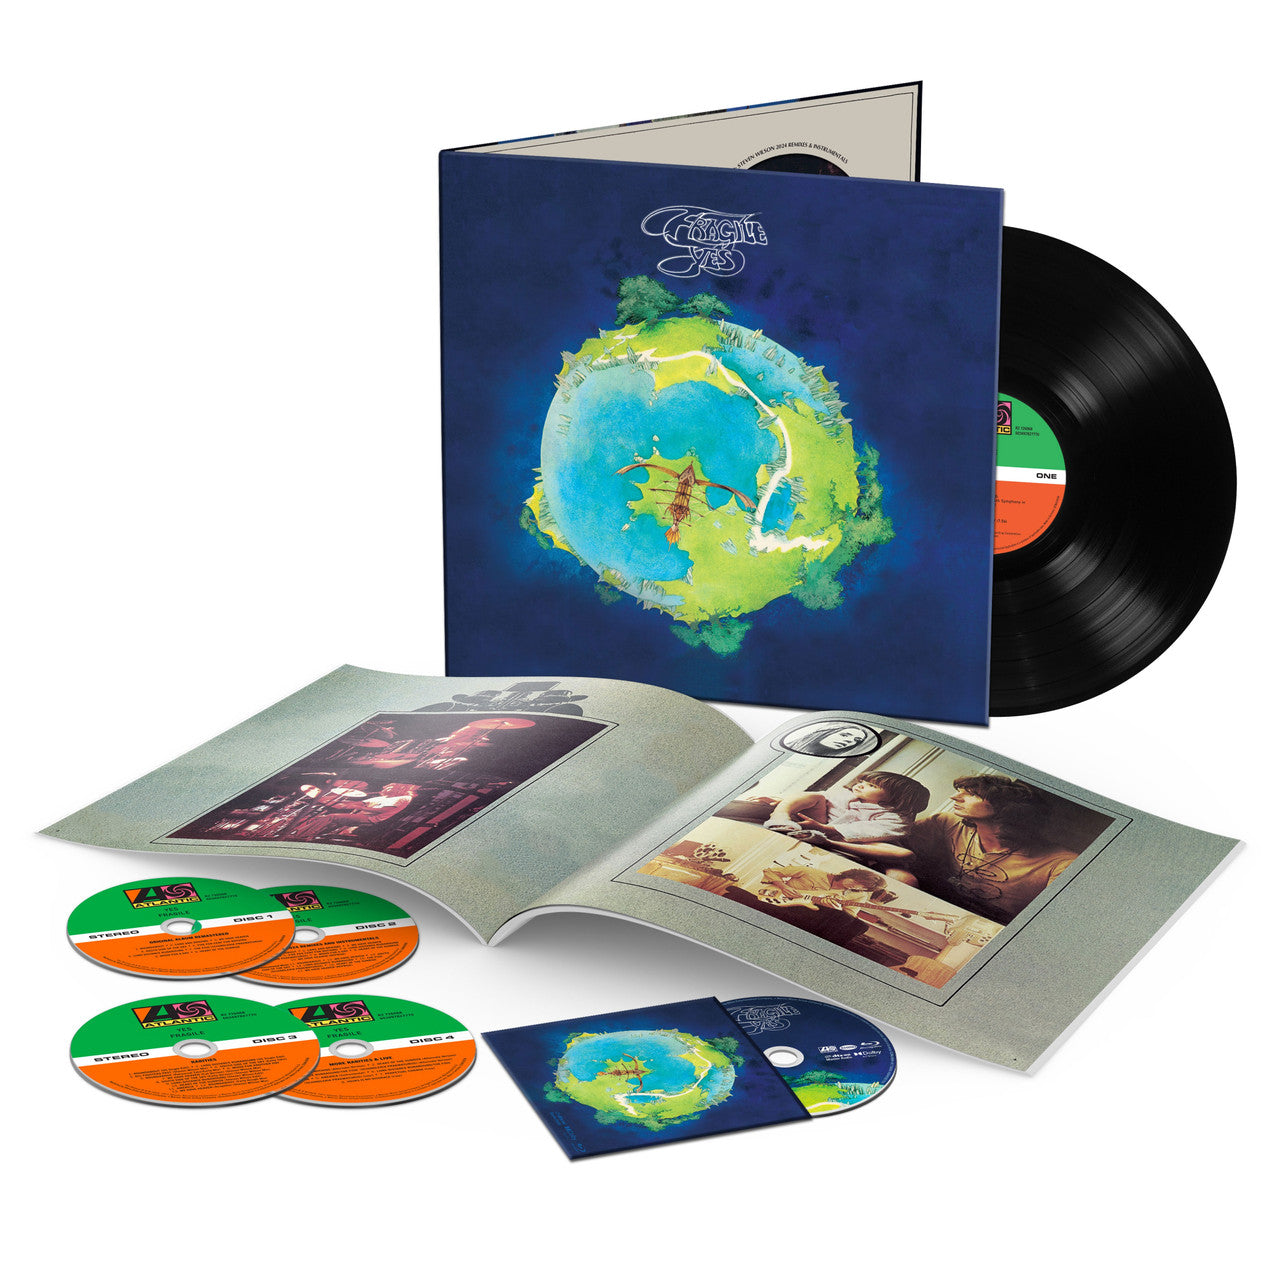 (Pre Order) Yes - Fragile (Super Deluxe Edition) - LP, 4x CD & Blu-Ray Audio Disc Box Set